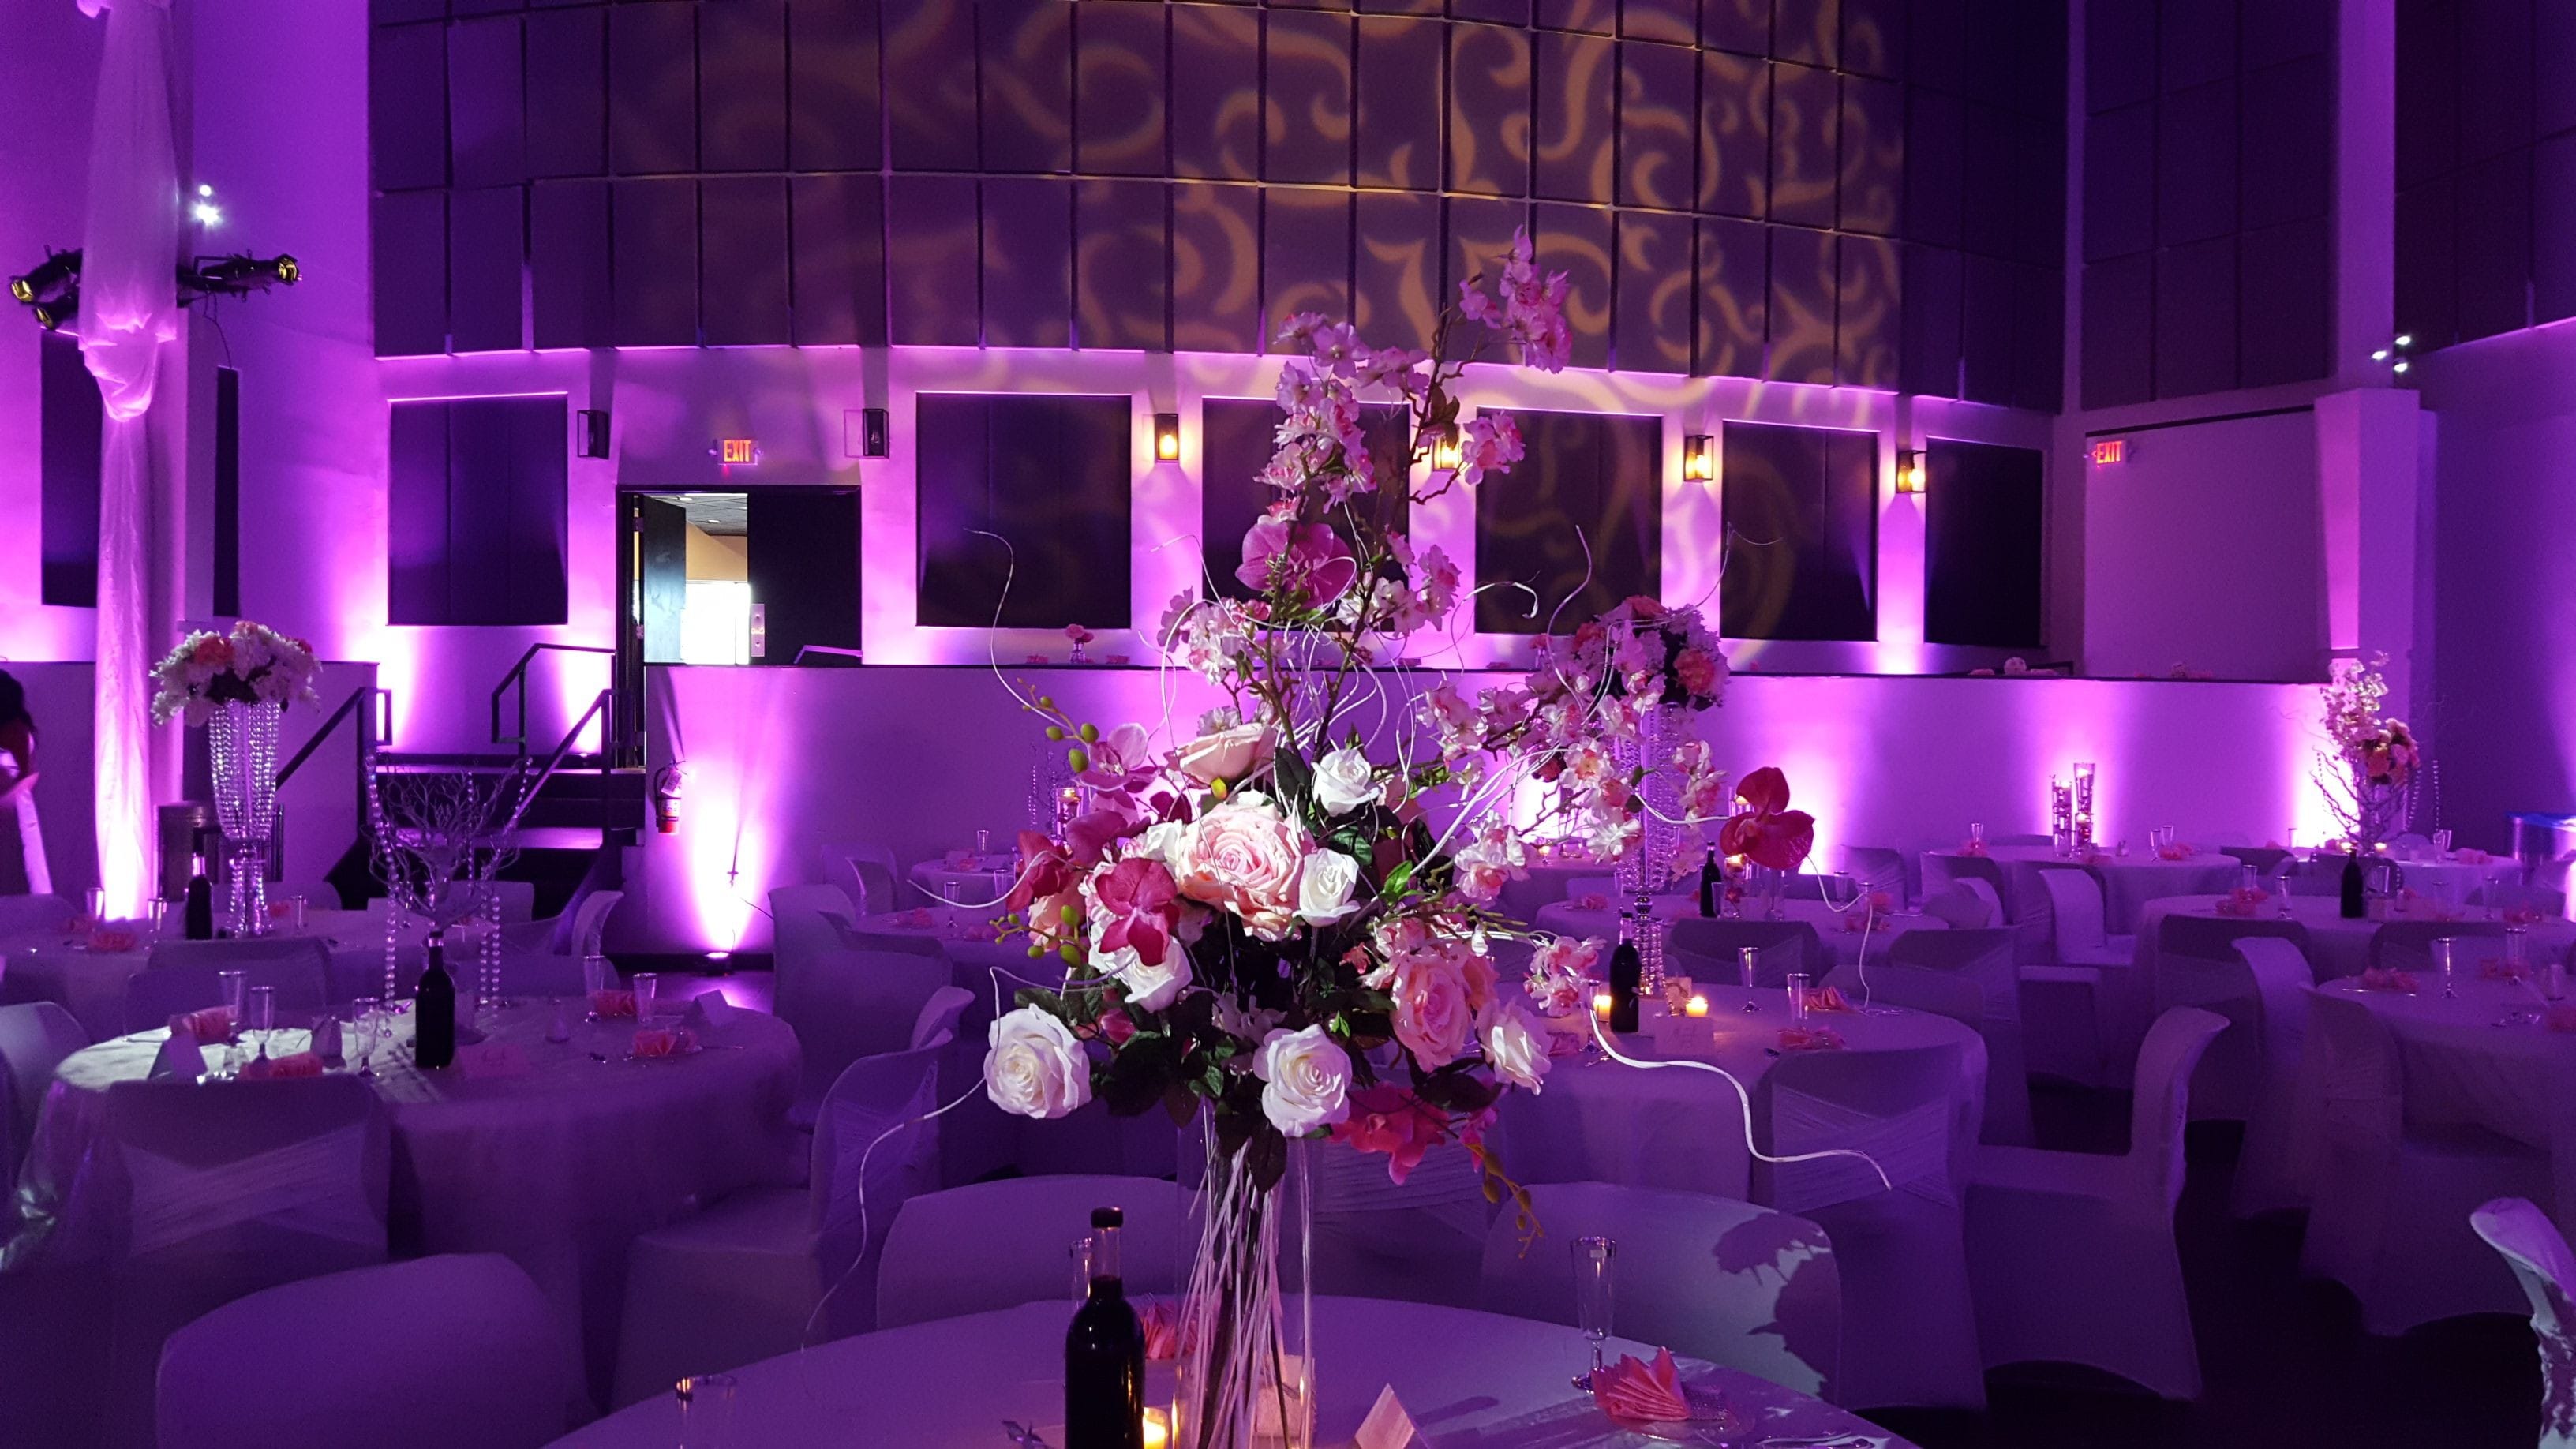 Wedding lighting at the Passion Event Center in Fridely. Up lighting in purple.